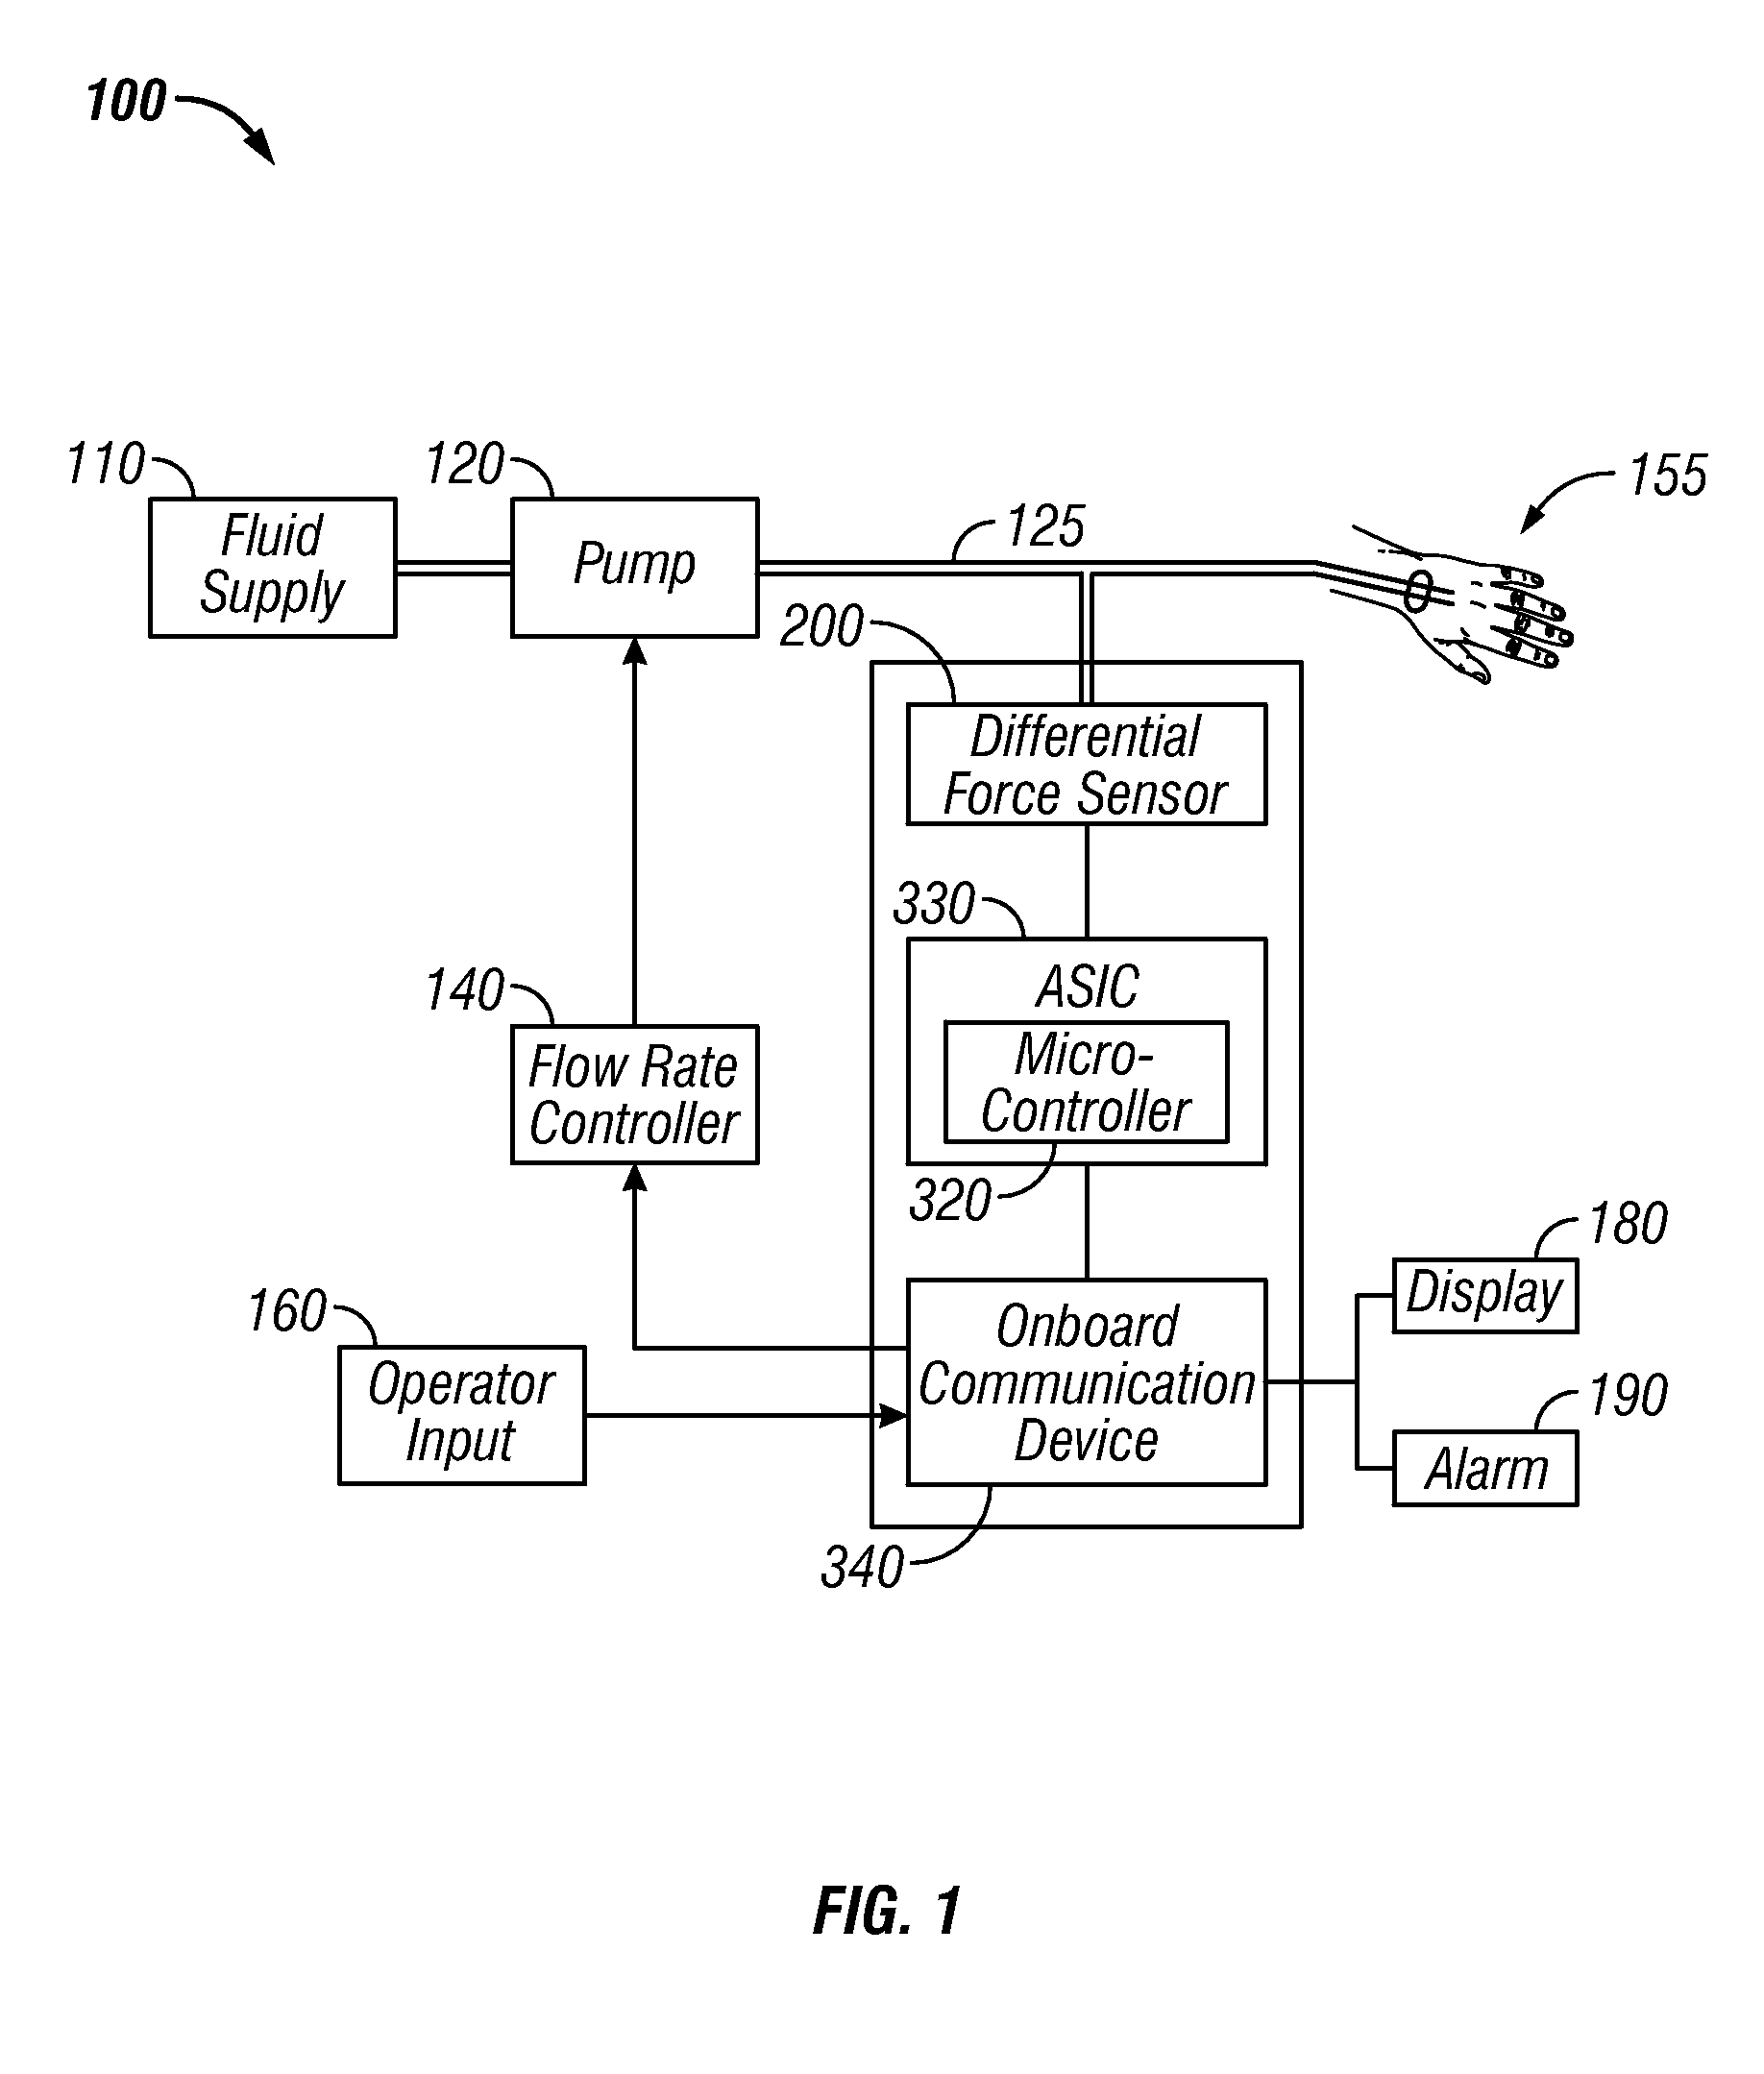 Method and system for measuring flow at patient utilizing differential force sensor